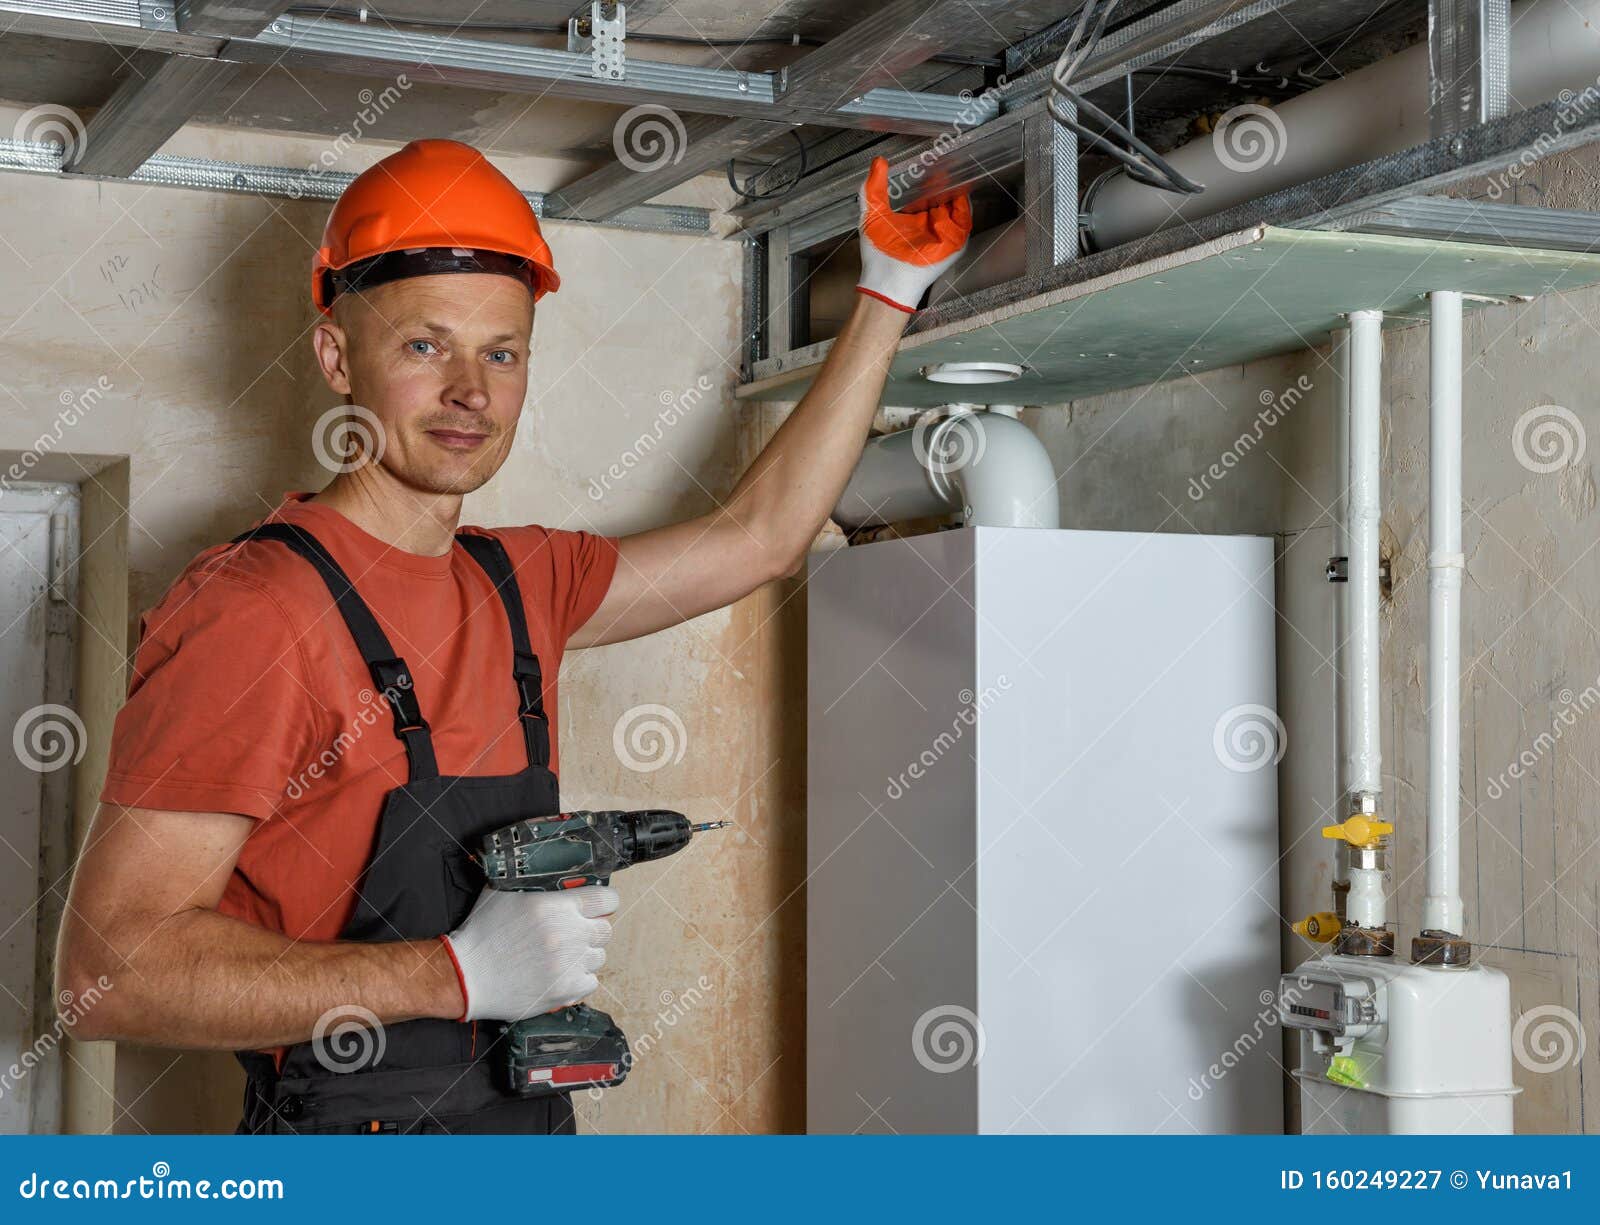 Plasterboard Installation On The Ceiling Stock Image Image Of